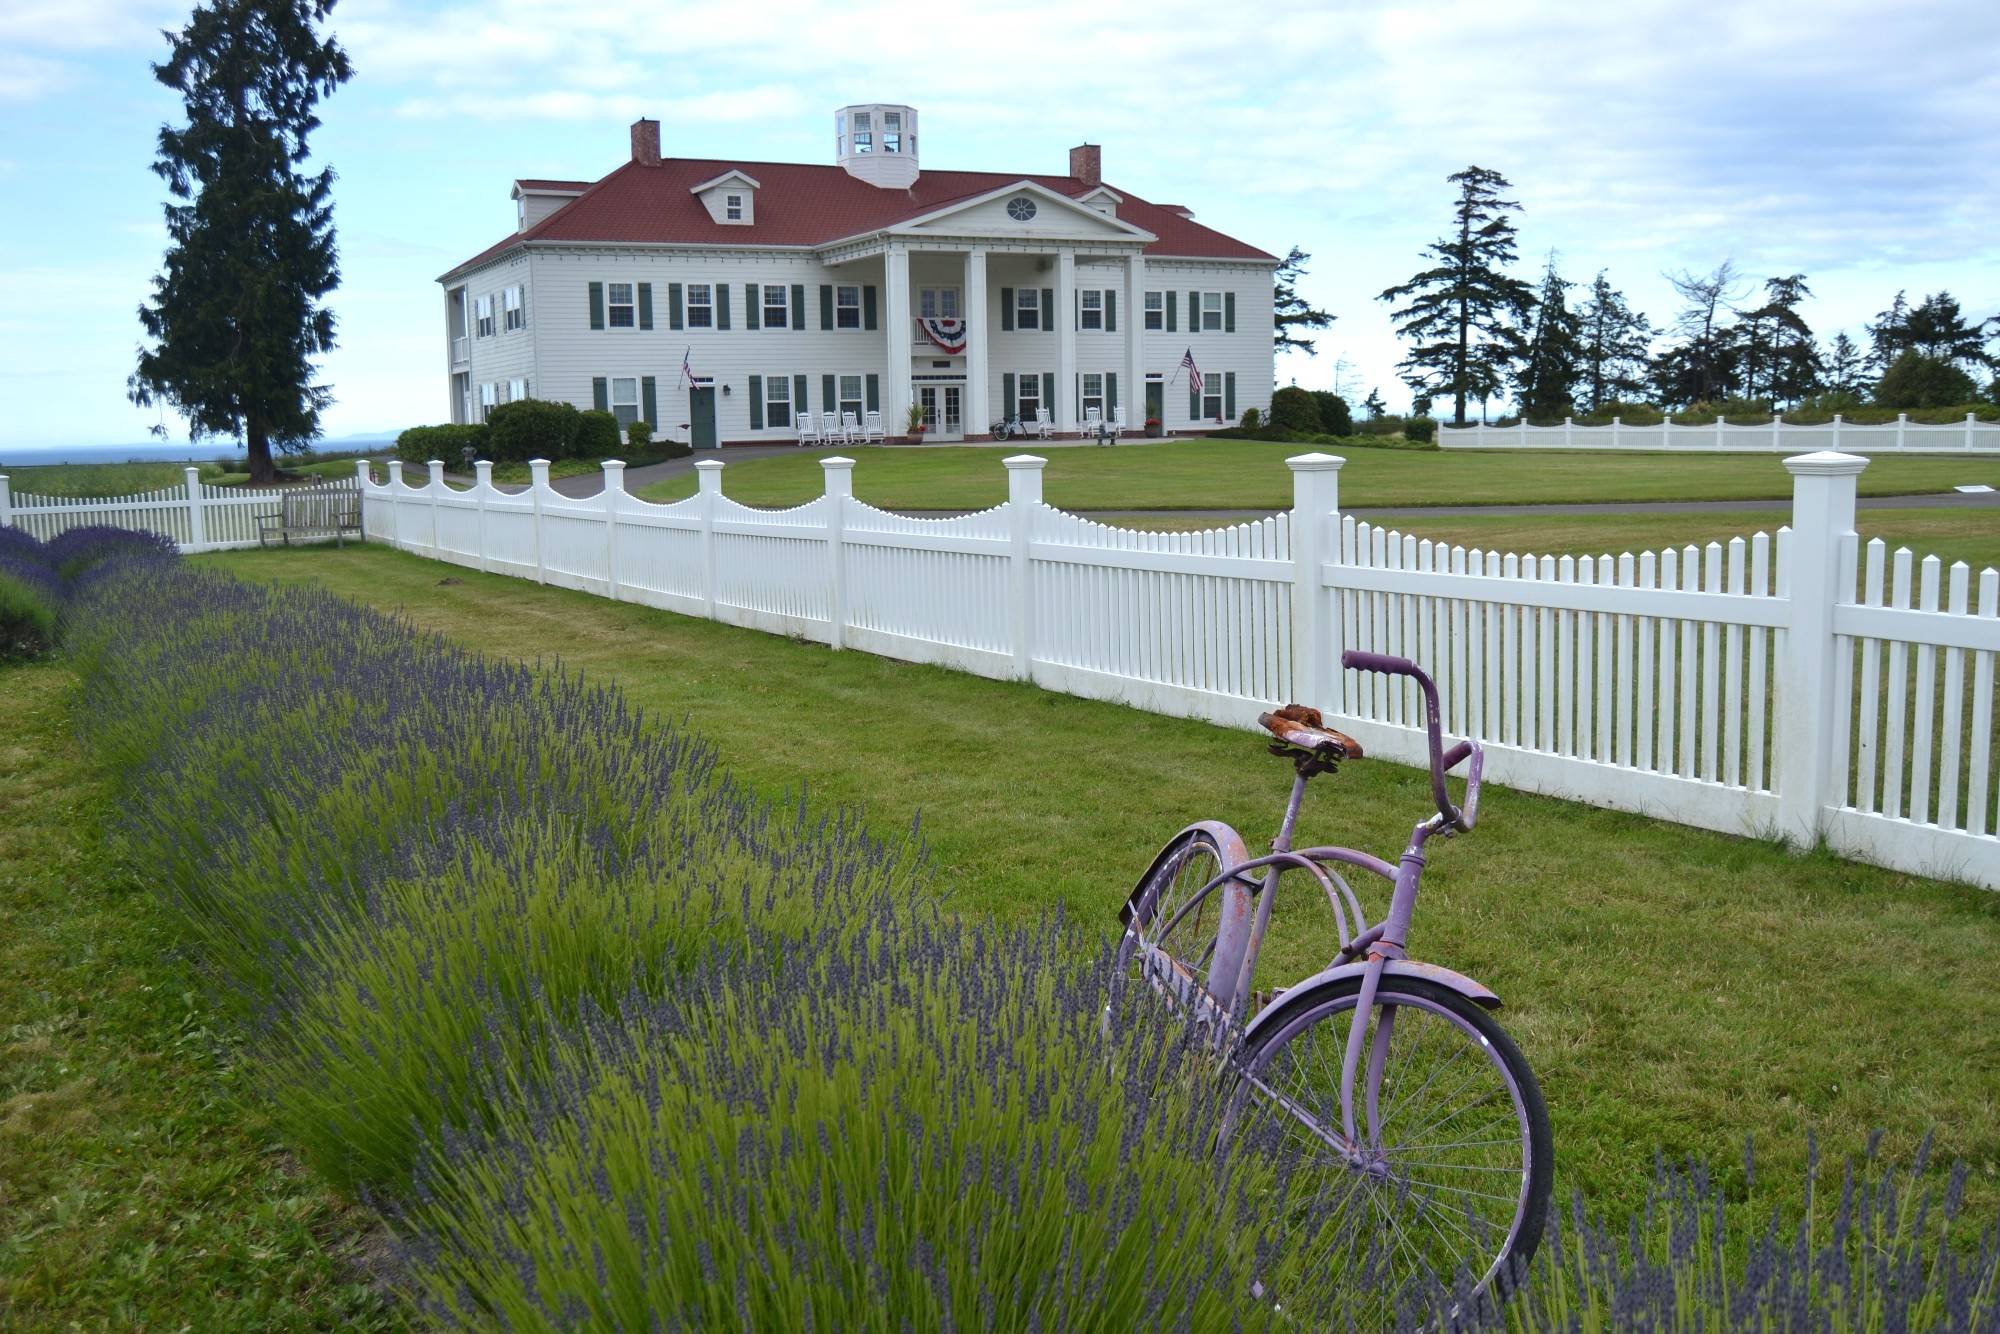 Washington Lavender and the George Washington Inn host a modified Washington Lavender Festival from July 10-19 with lavender ice cream, some vendors and lavender craft sessions with safety provisions in place to prevent the potential spread of Covid-19. Sequim Gazette photo by Matthew Nash